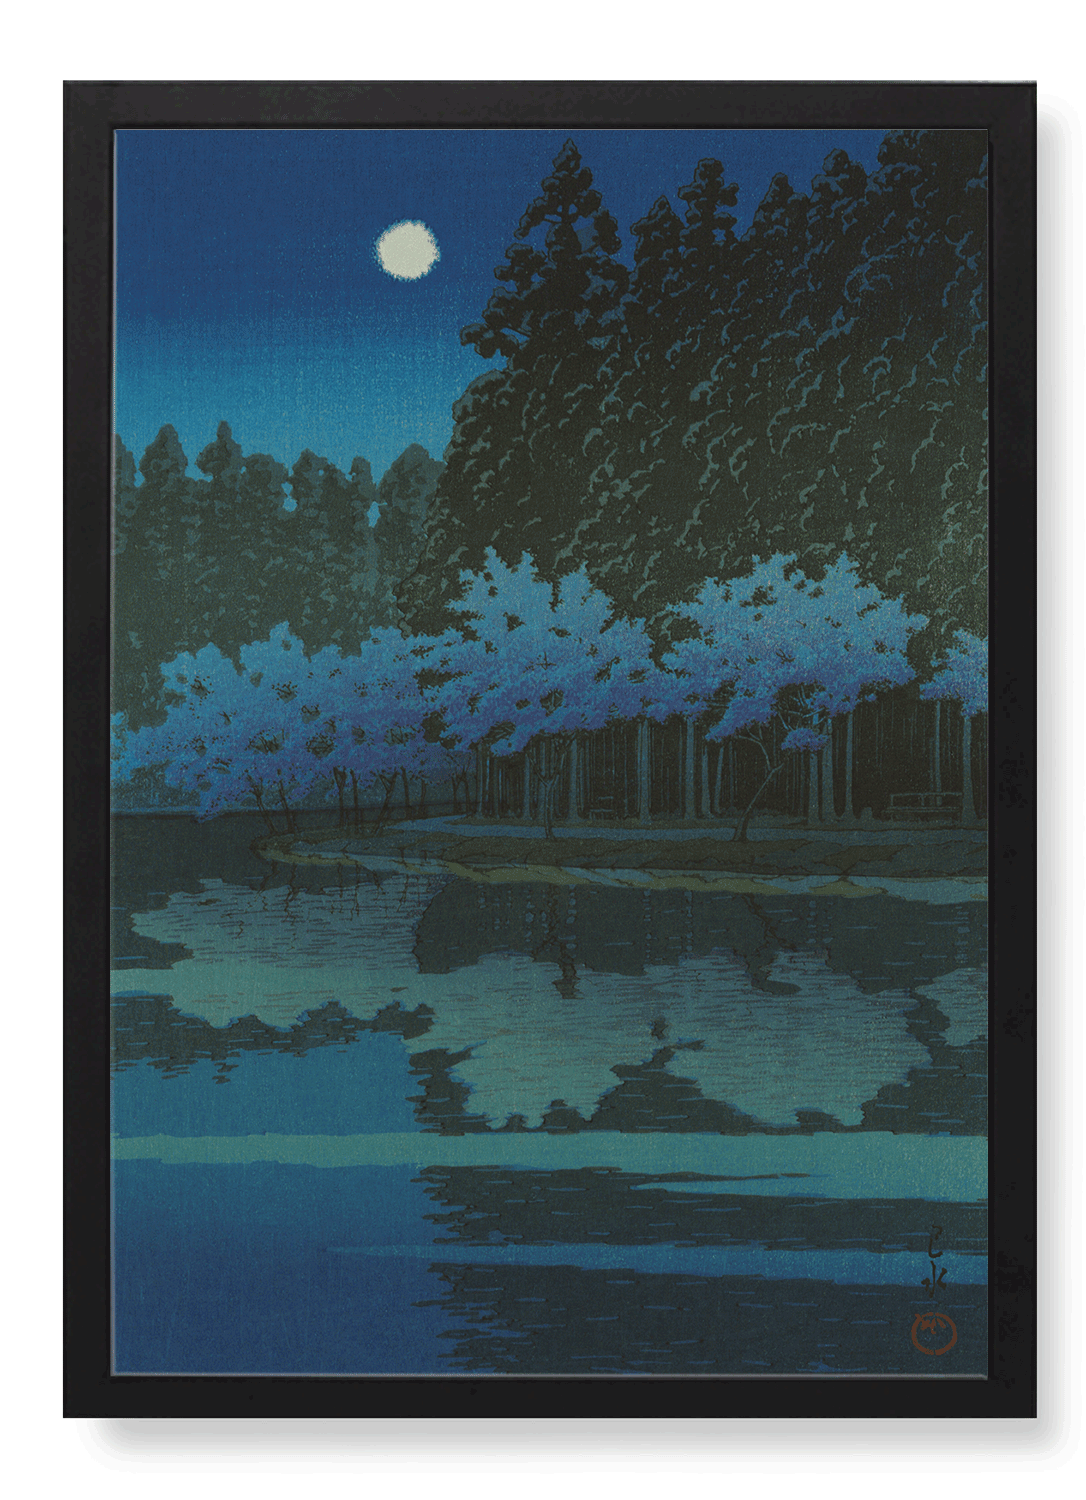 SPRING CHERRY BLOSSOMS AT NIGHT